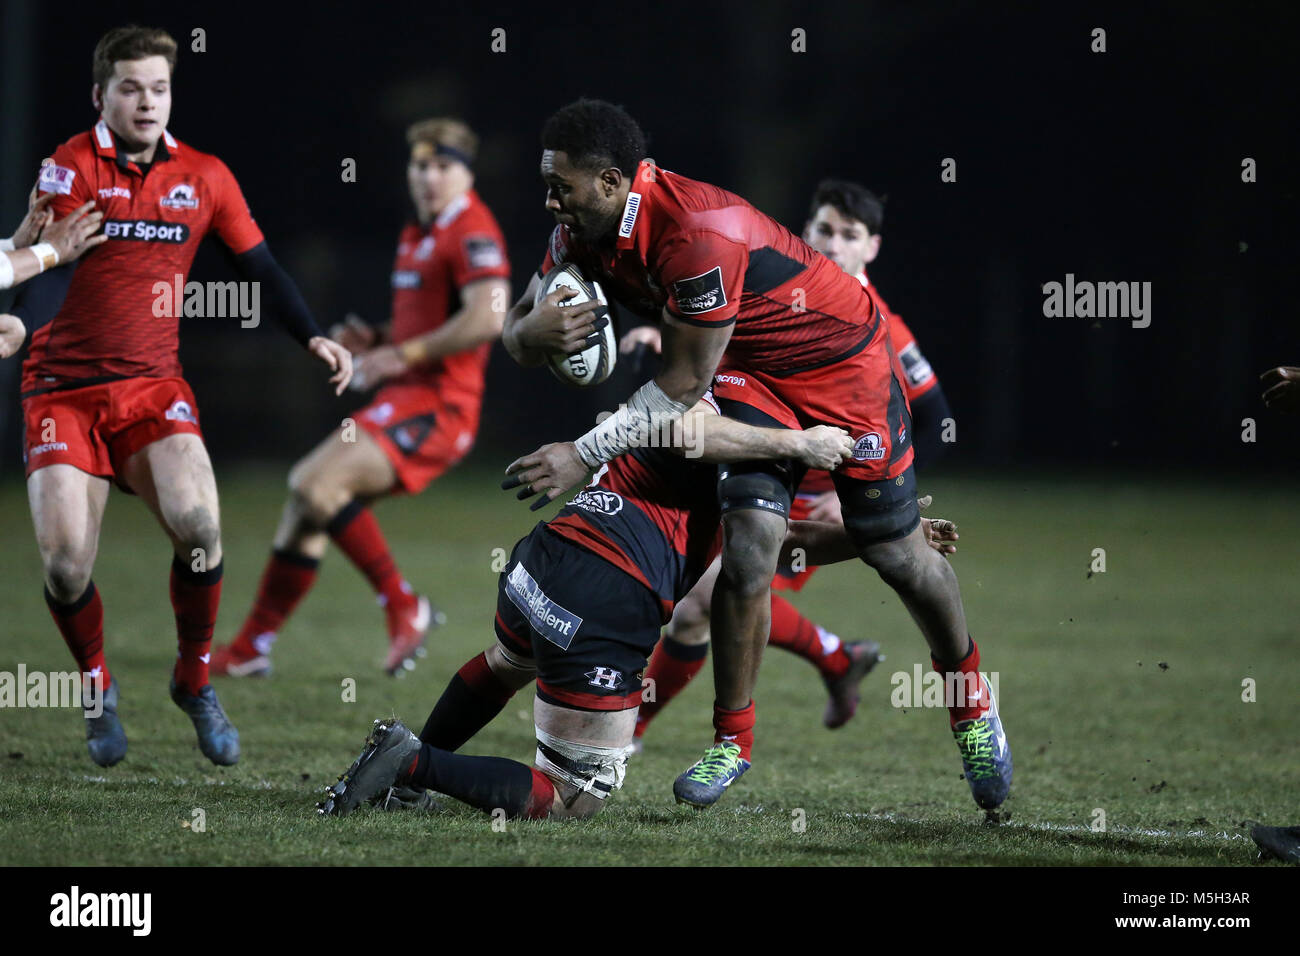 Bill Mata of Edinburgh rugby is tackled. Guinness Pro14 rugby match,  Dragons v Edinburgh Rugby at Eugene Cross Park in Ebbw Vale. Andrew  Orchard/Alamy Live News Stock Photo - Alamy